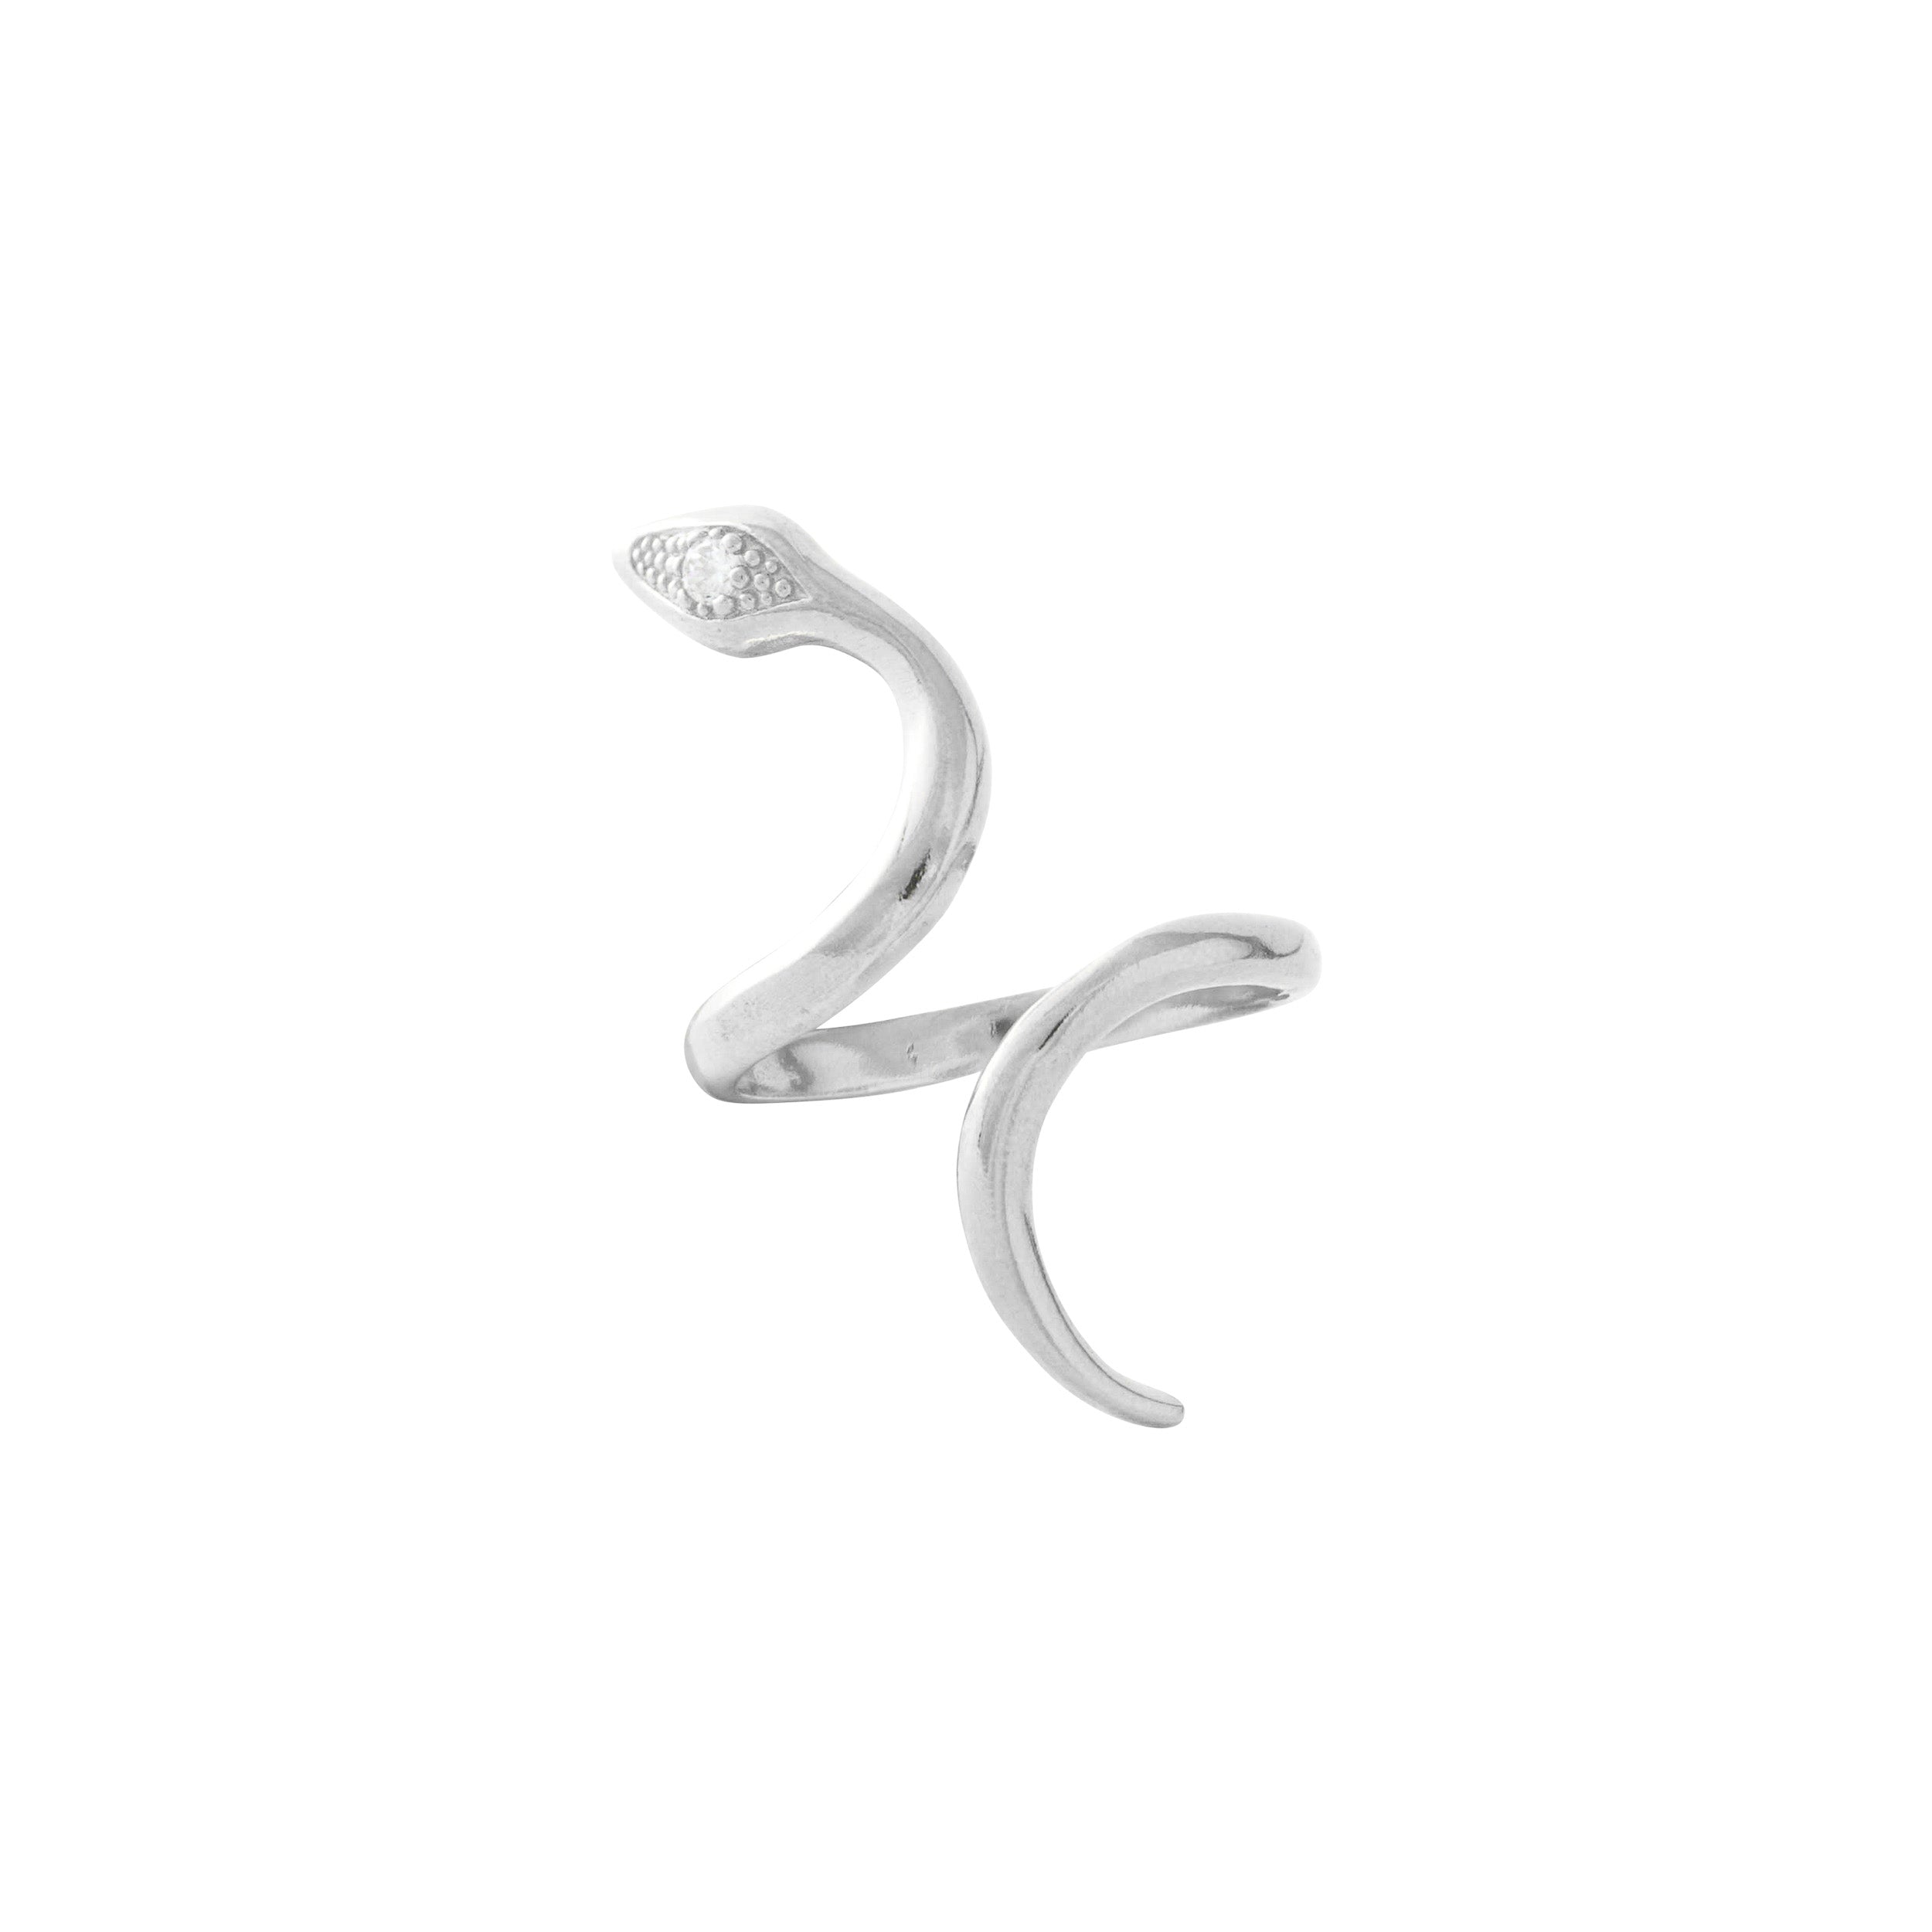 SILVER TWISTED SERPENT RING